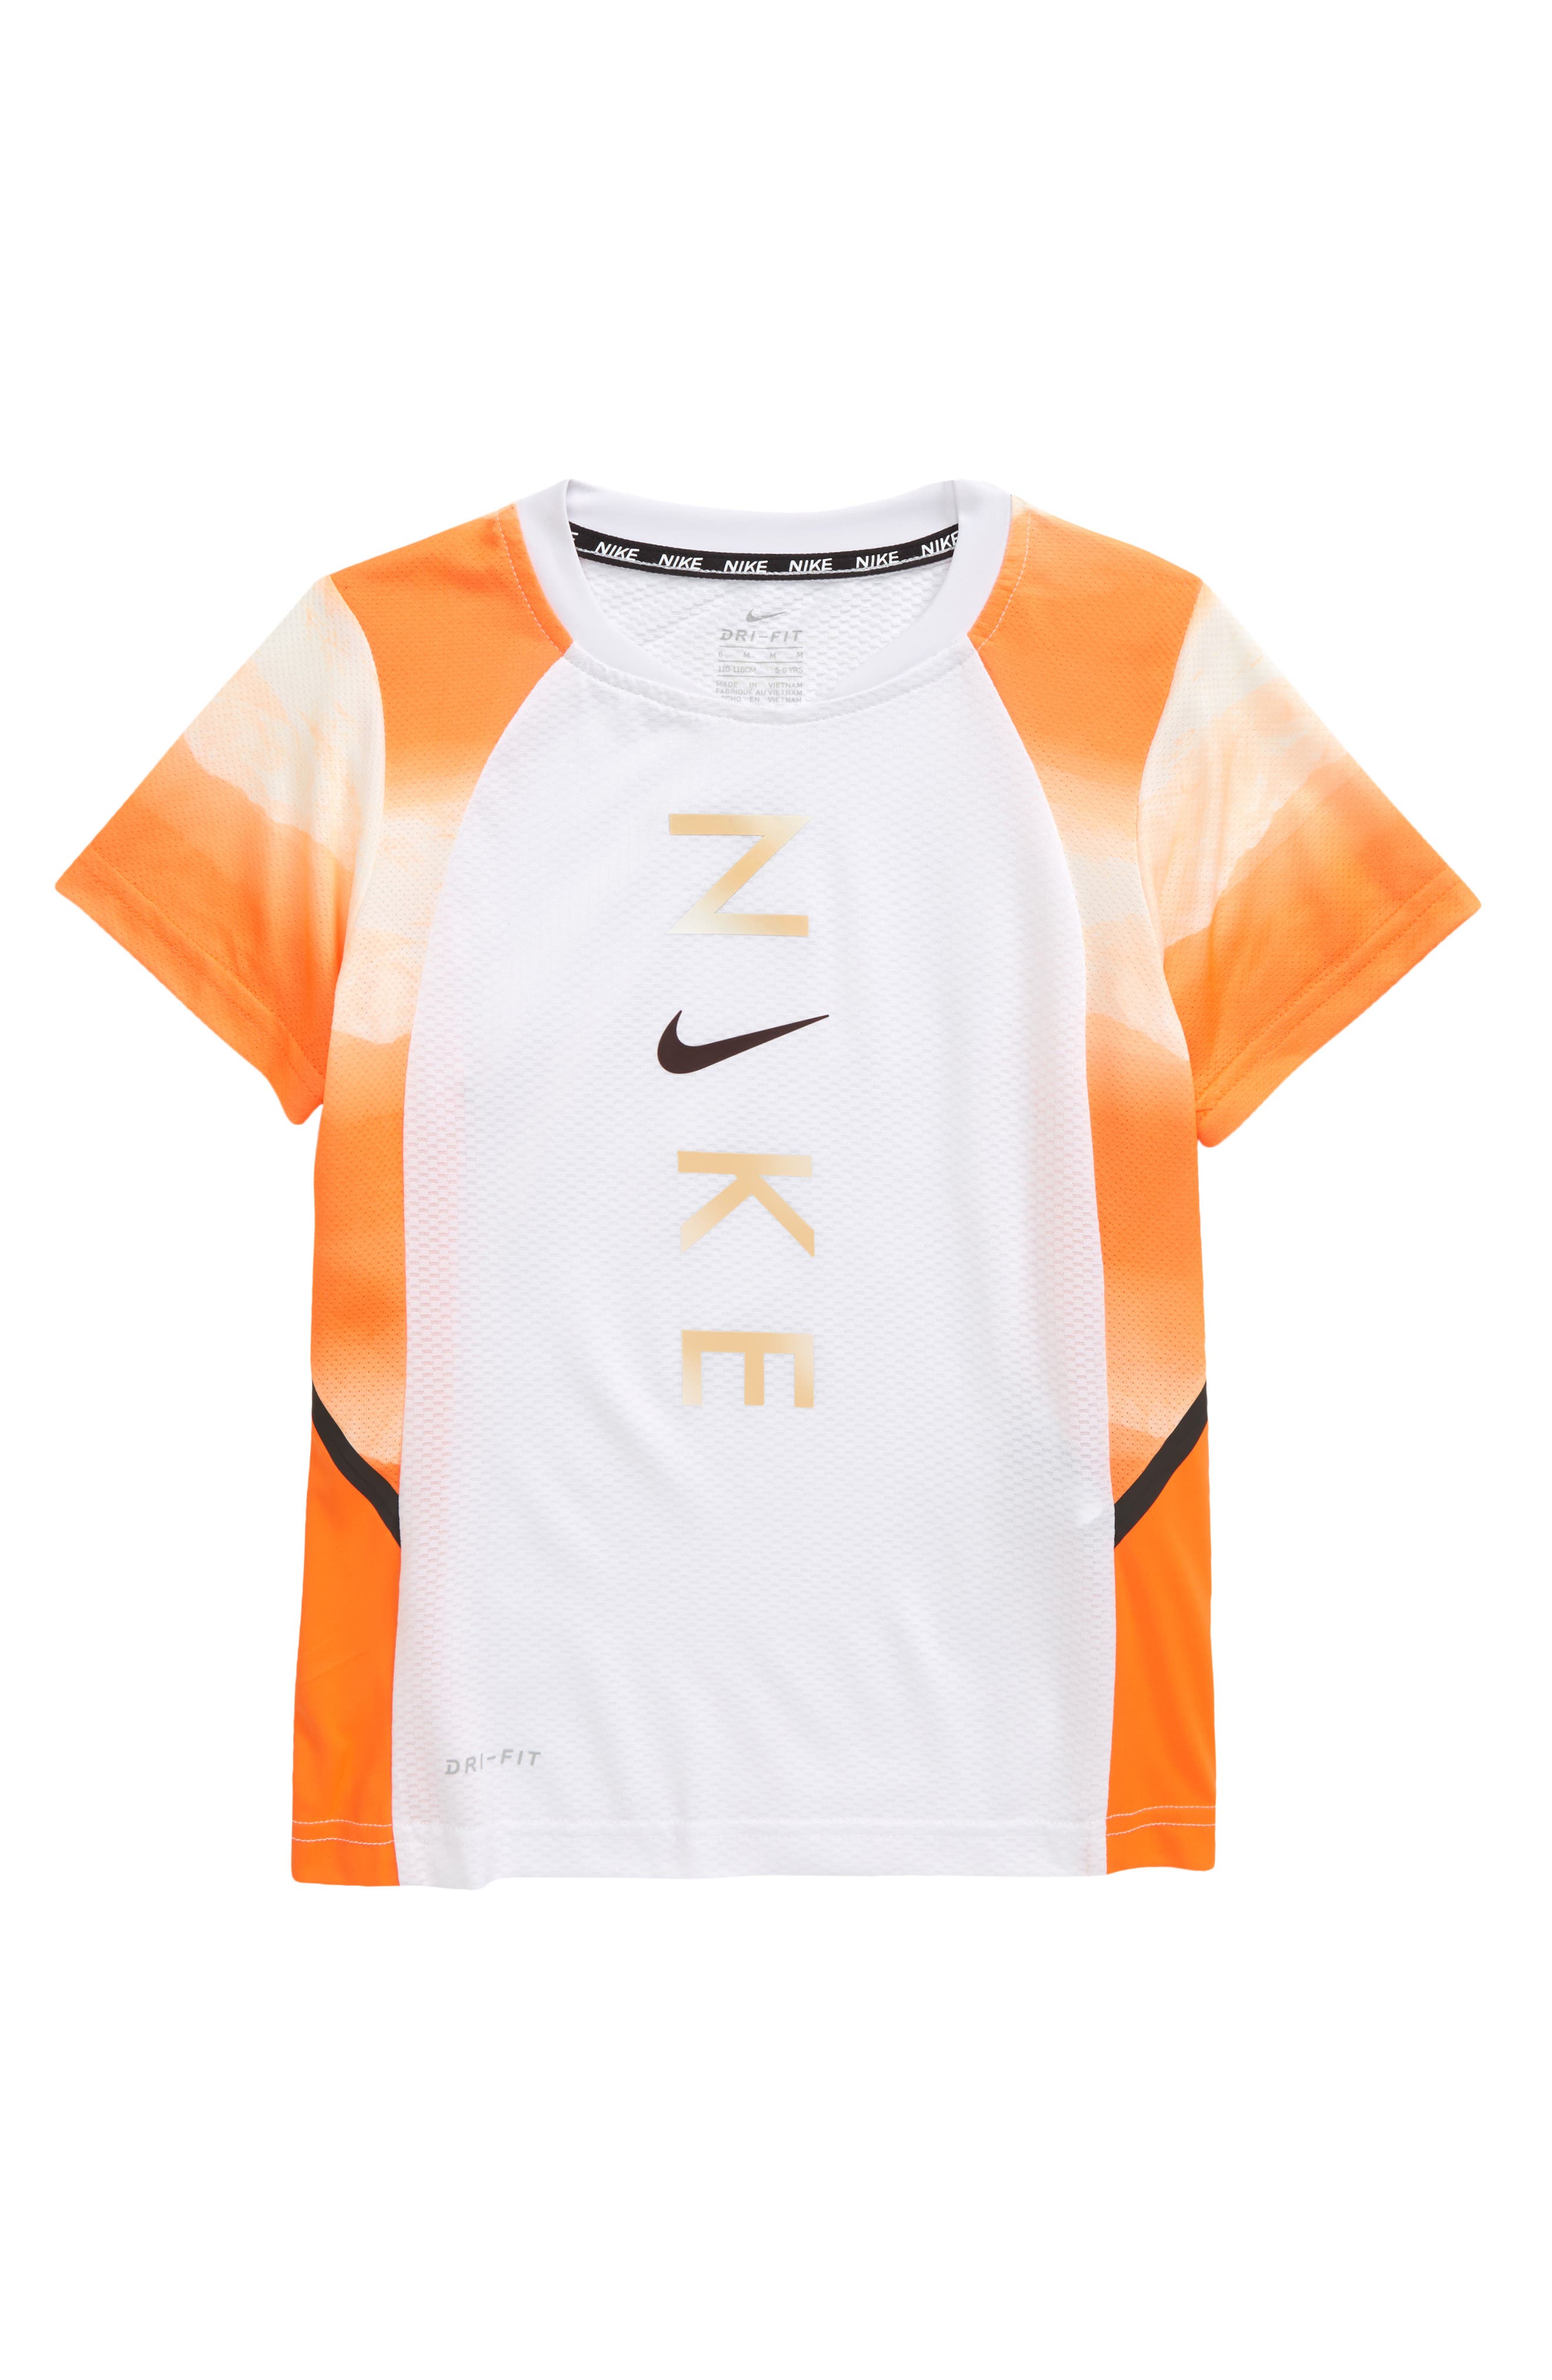 2t nike outfits boy